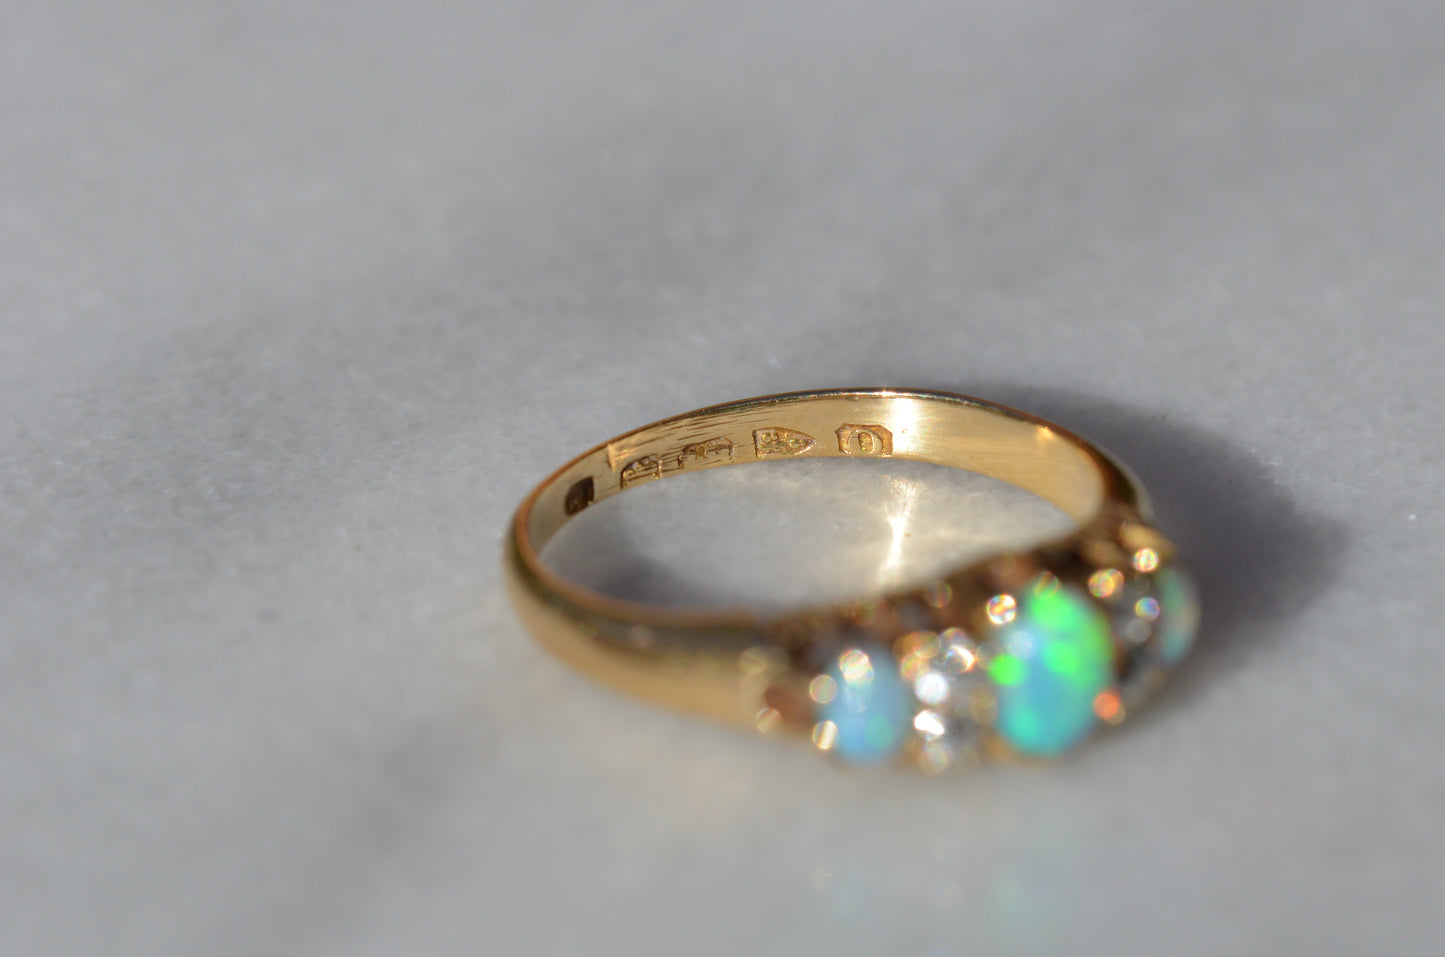 A closely-cropped macro of the Victorian ring. The ring is photographed looking into the band to see the British hallmark stamps within.